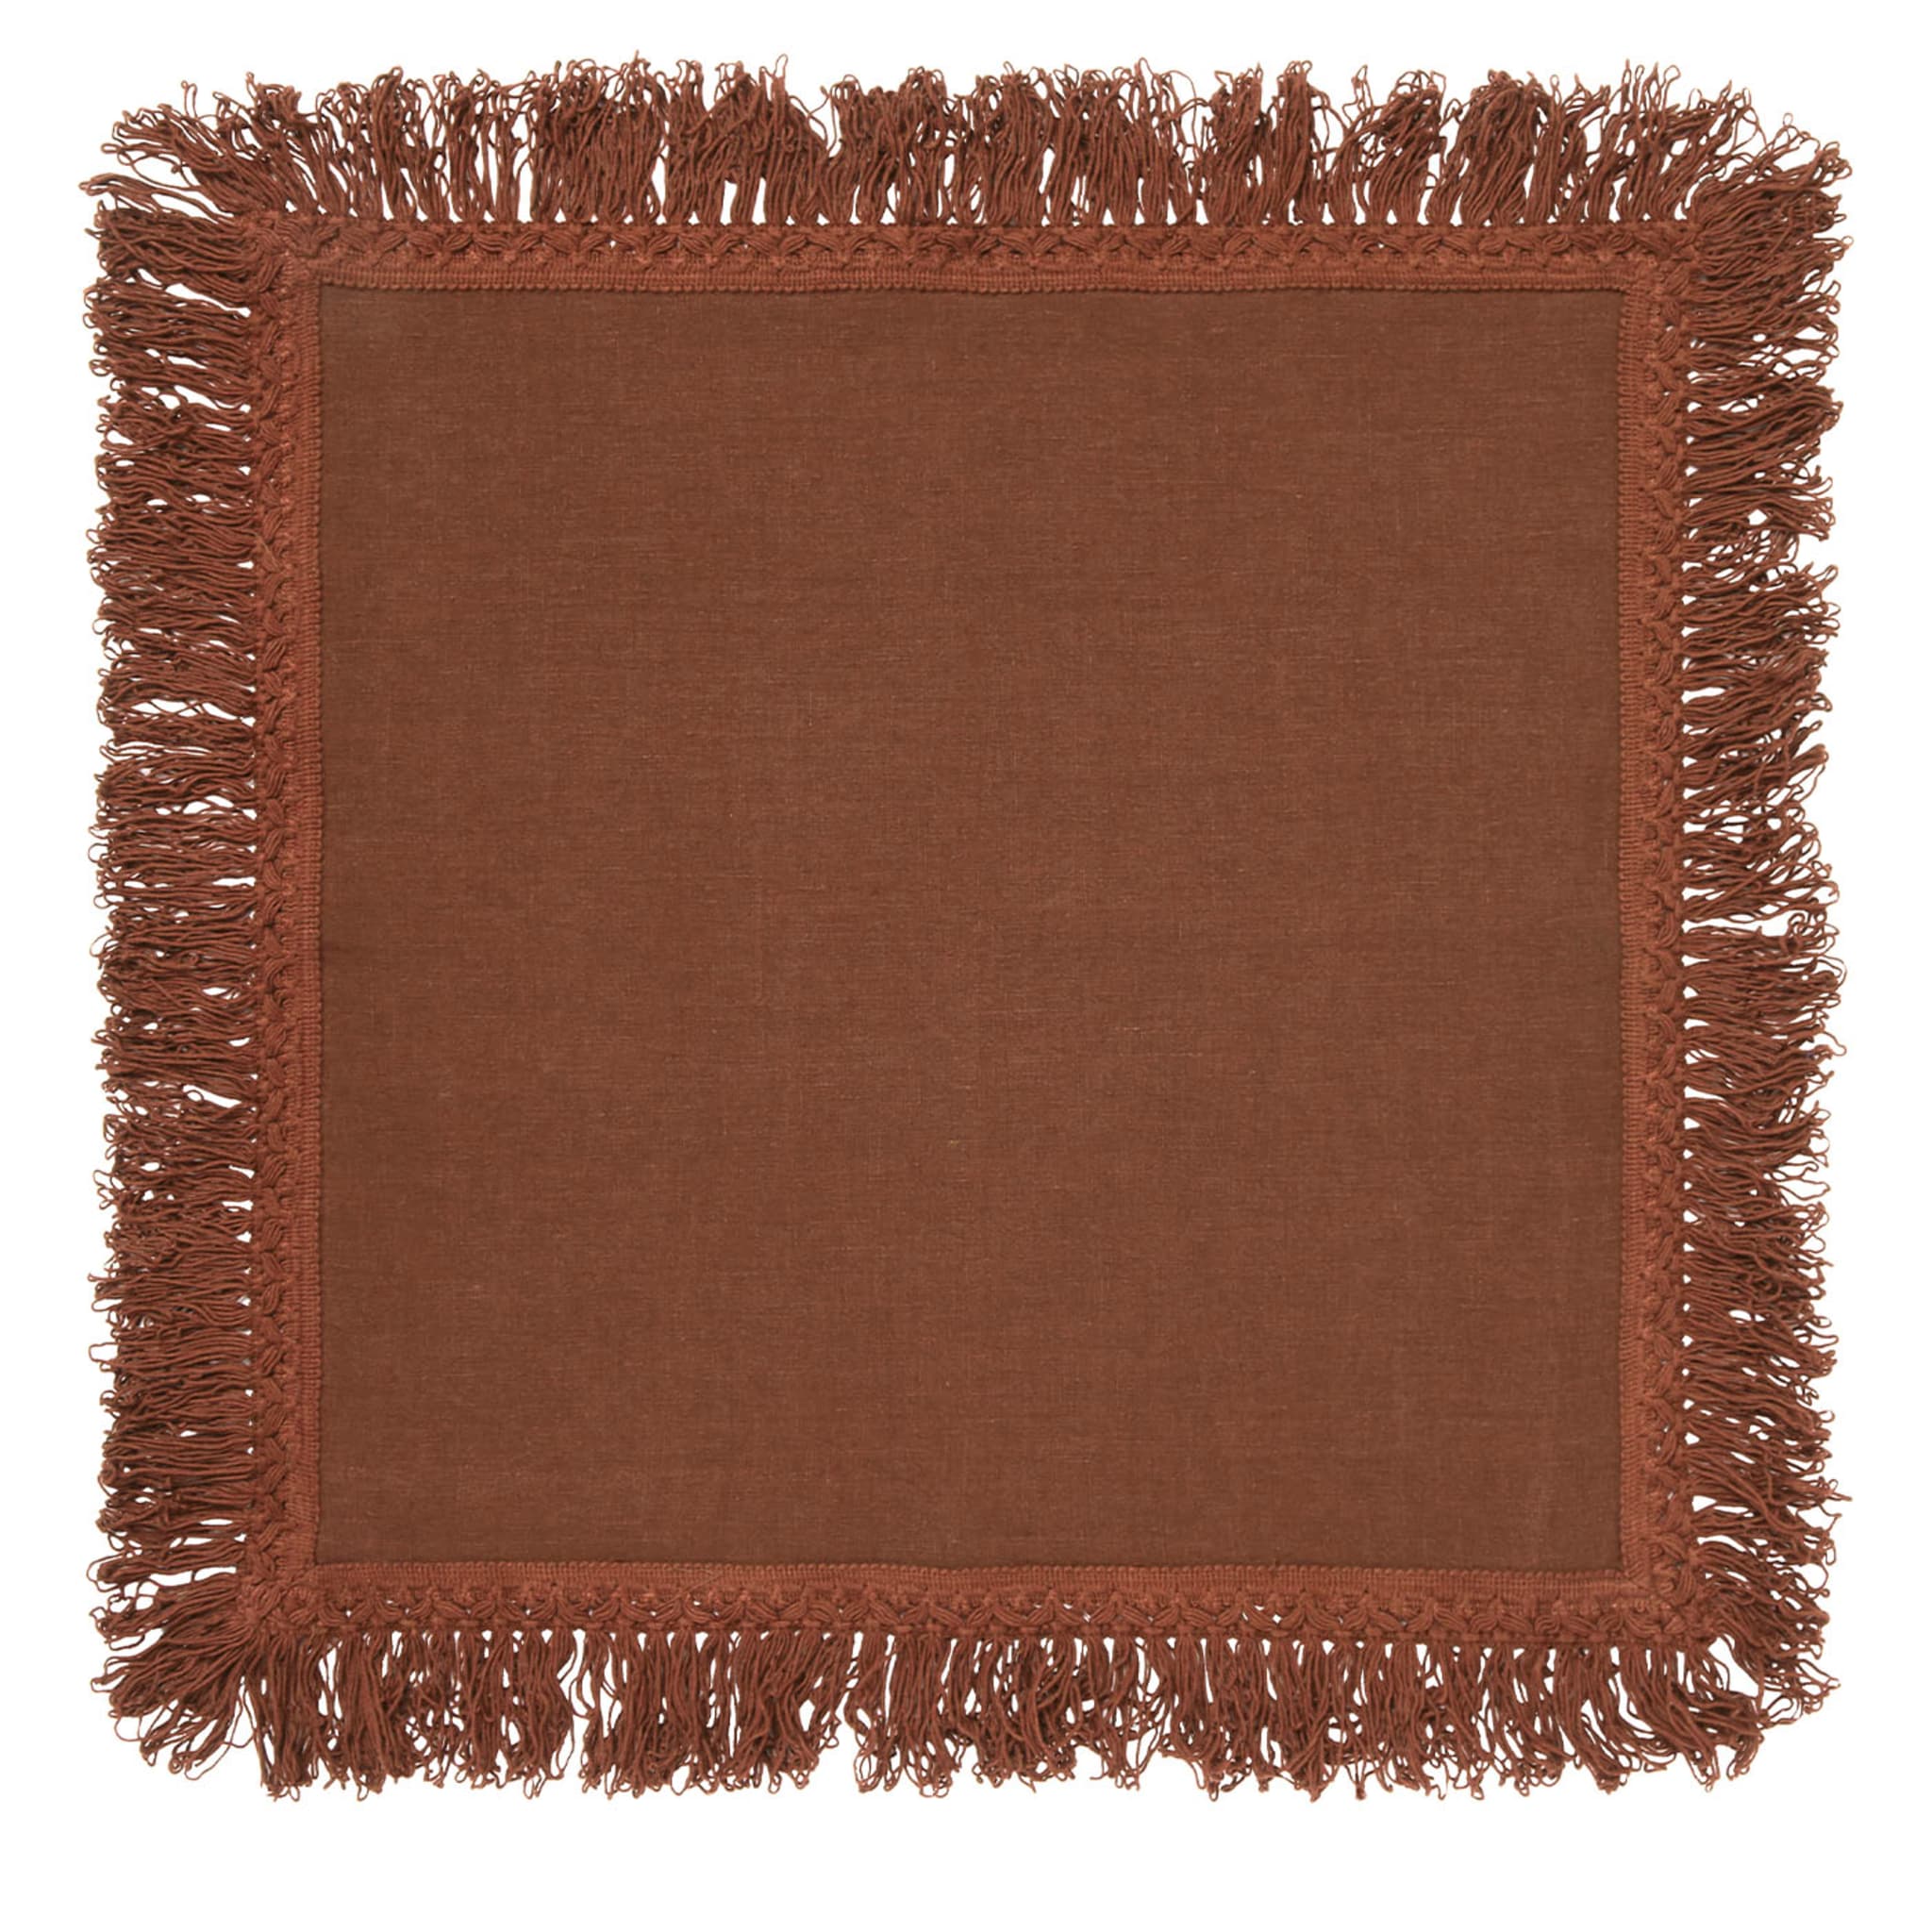 Set of 4 Sequoia Napkins with Long Fringes - Alternative view 1